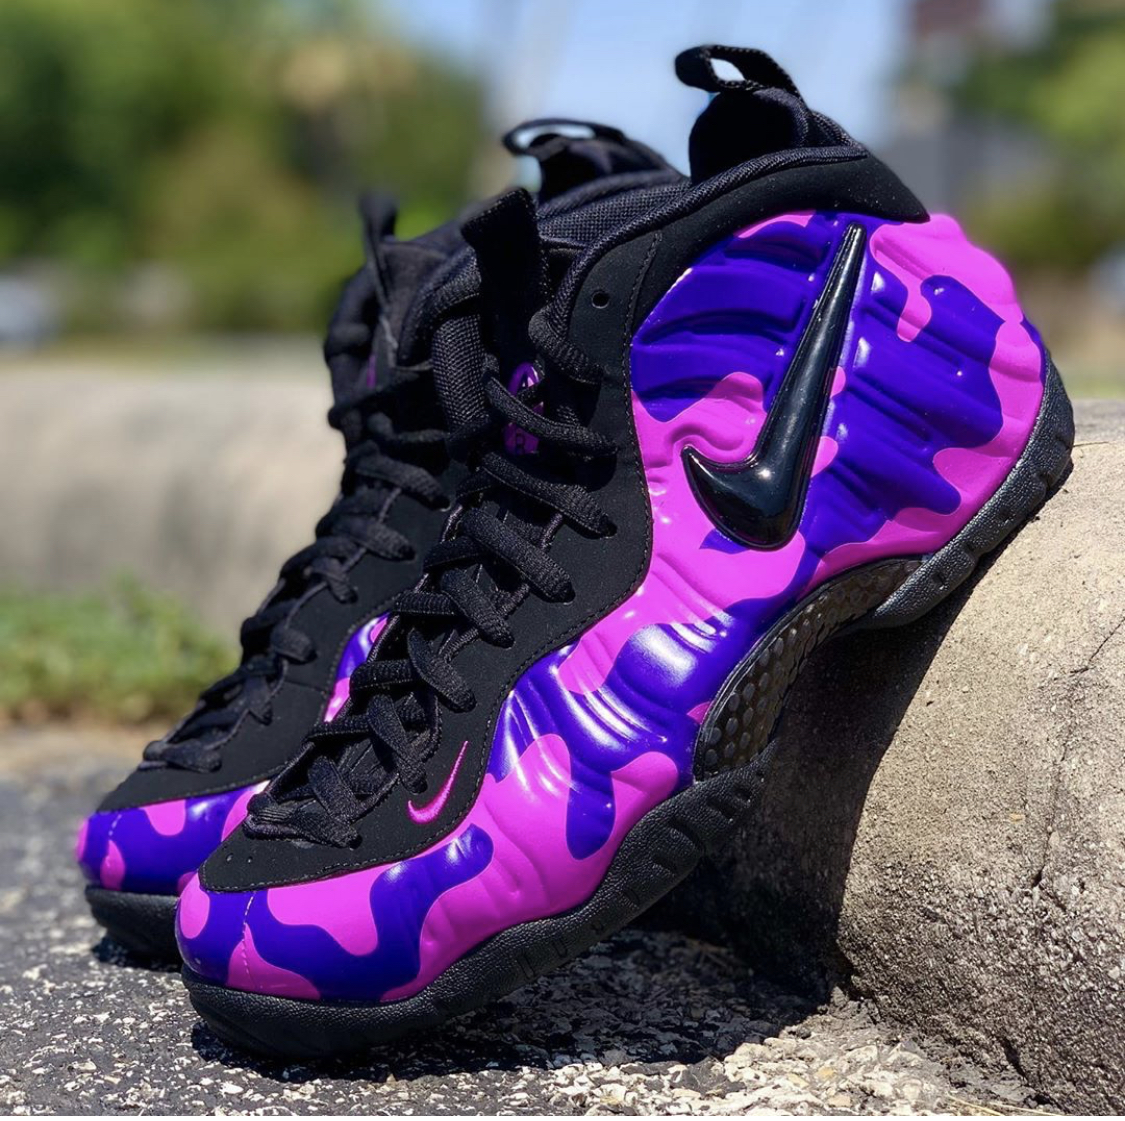 Images of the Purple Camouflage Nike 